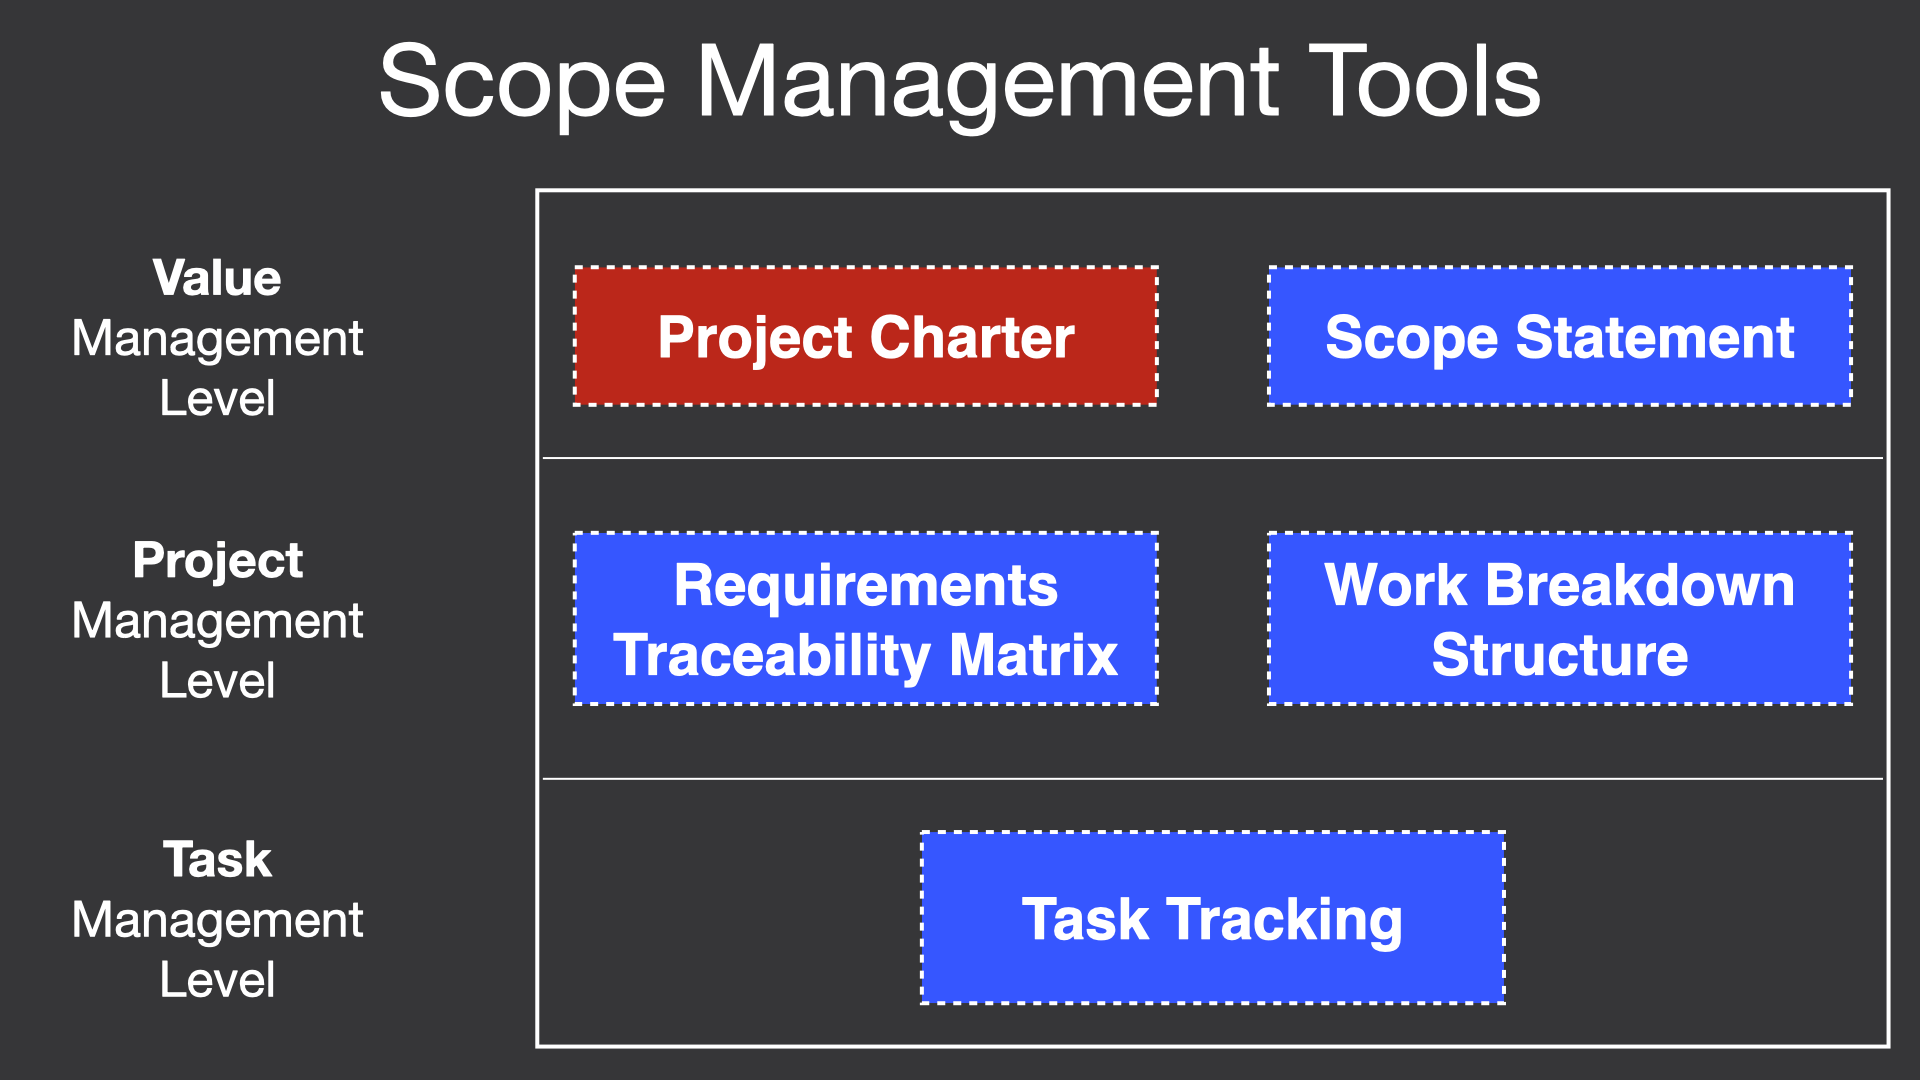 Project charter is a scope management tool.